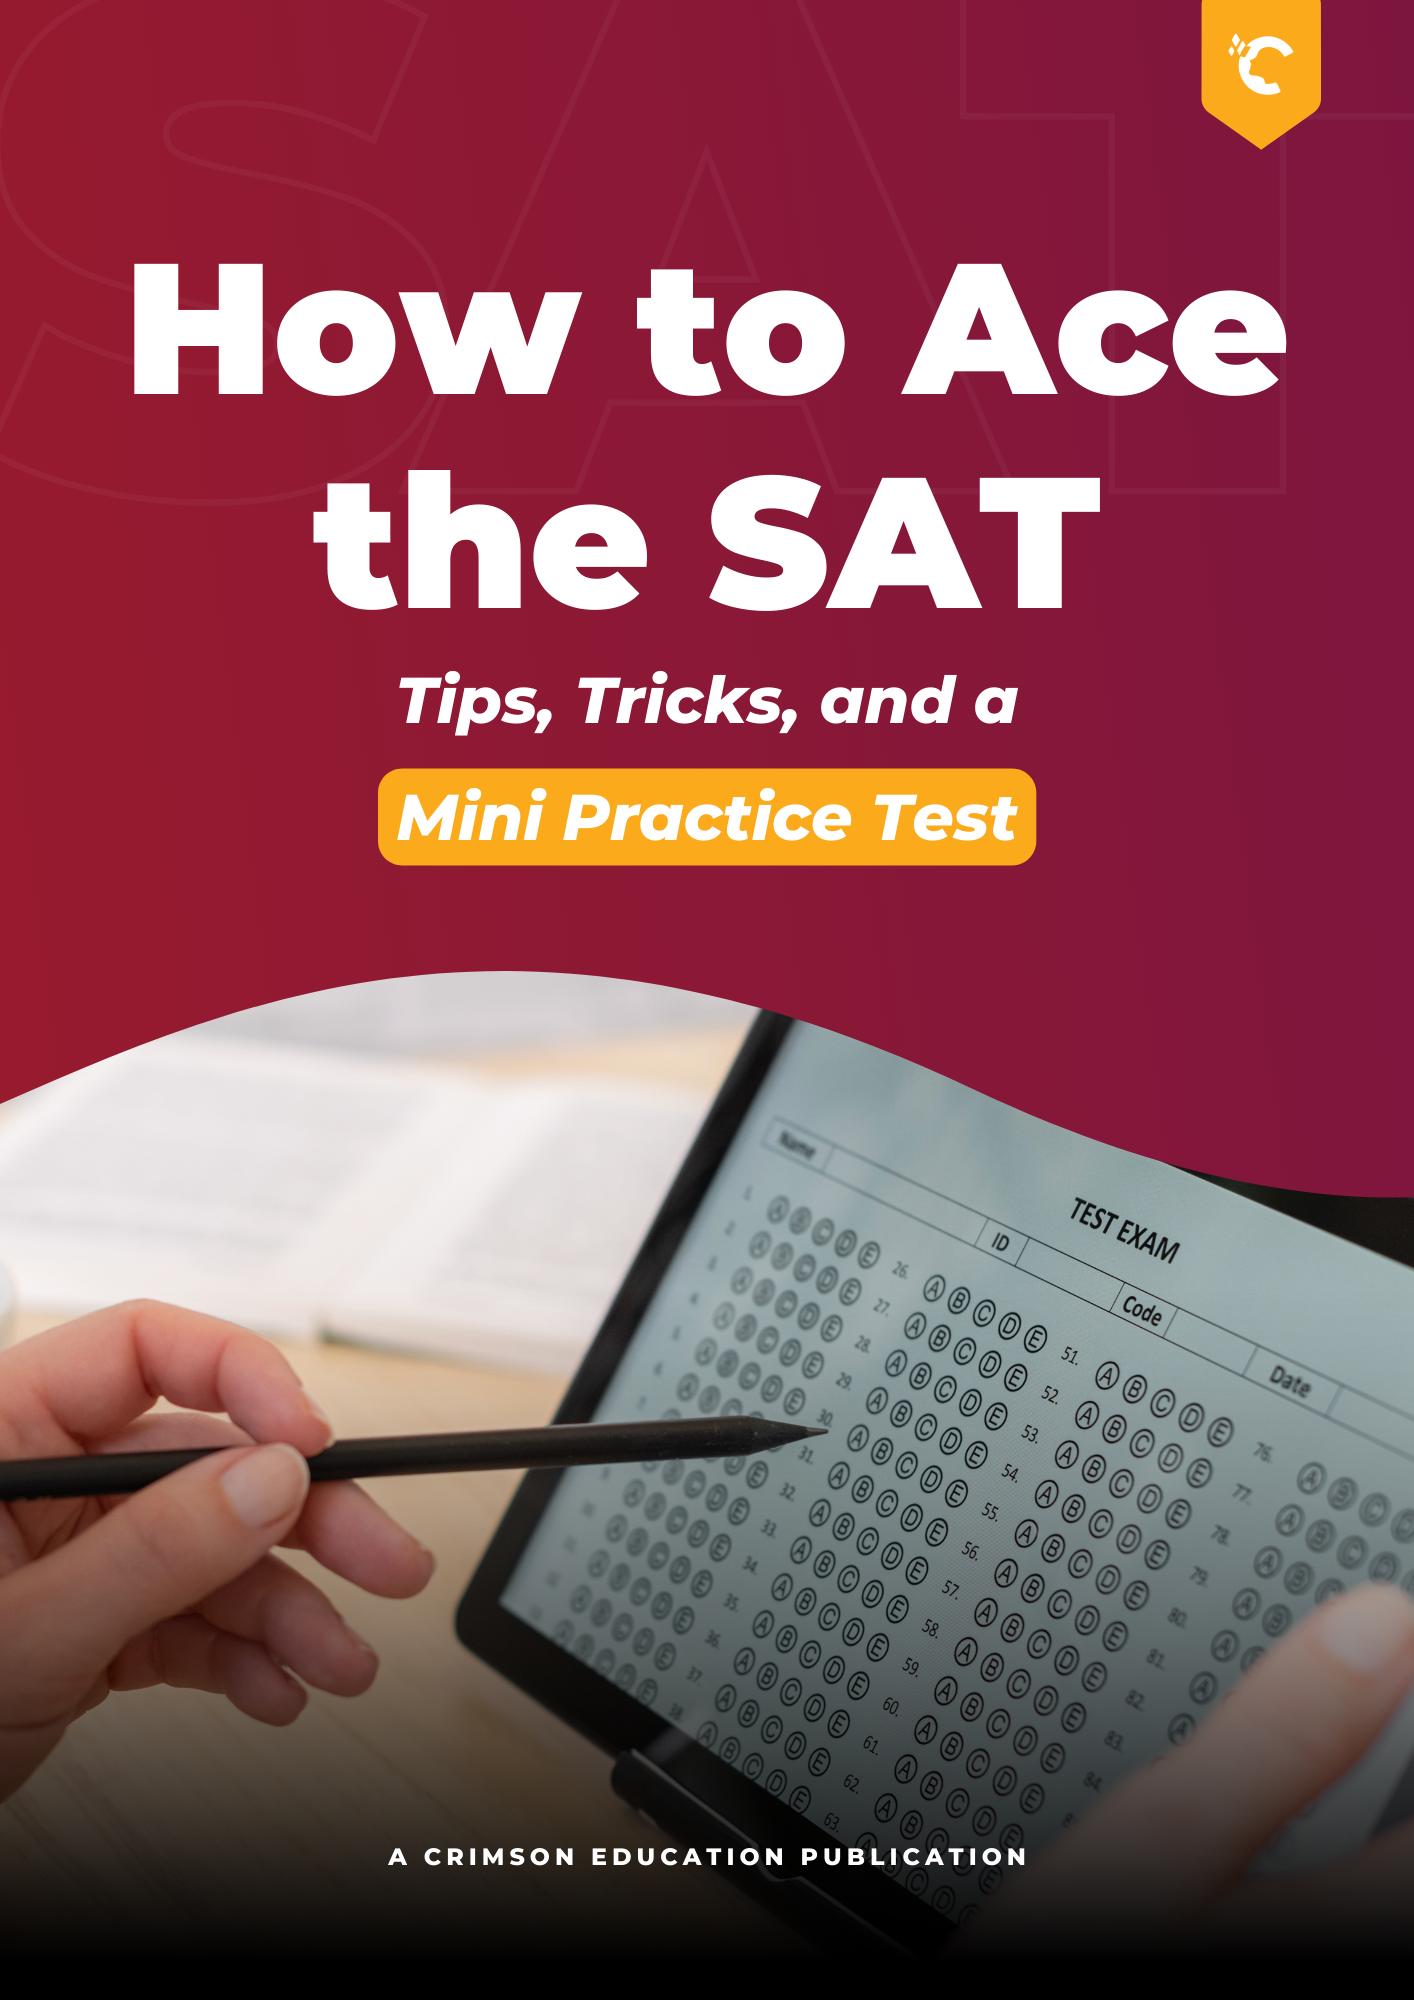 How to ace the SAT ebook